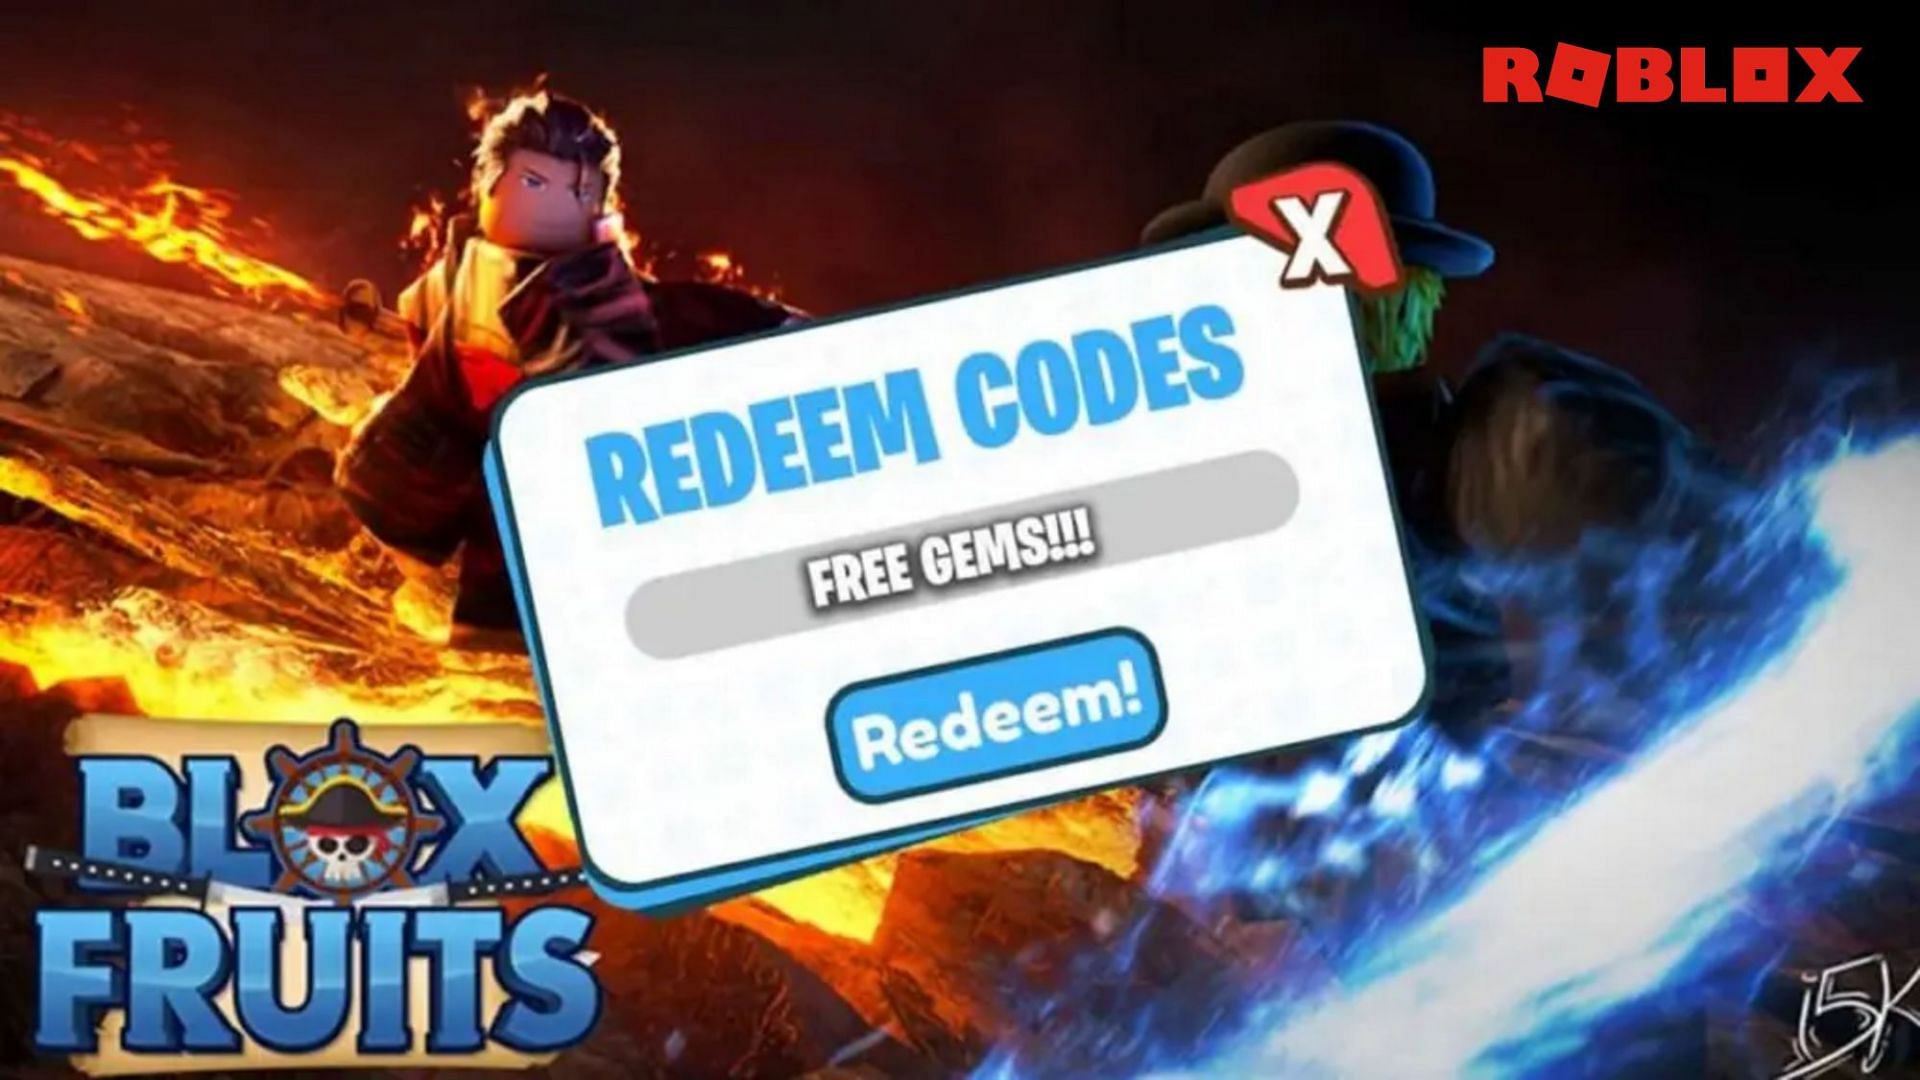 Roblox Blox Fruits codes (October 2022) Free resets, XP, and more